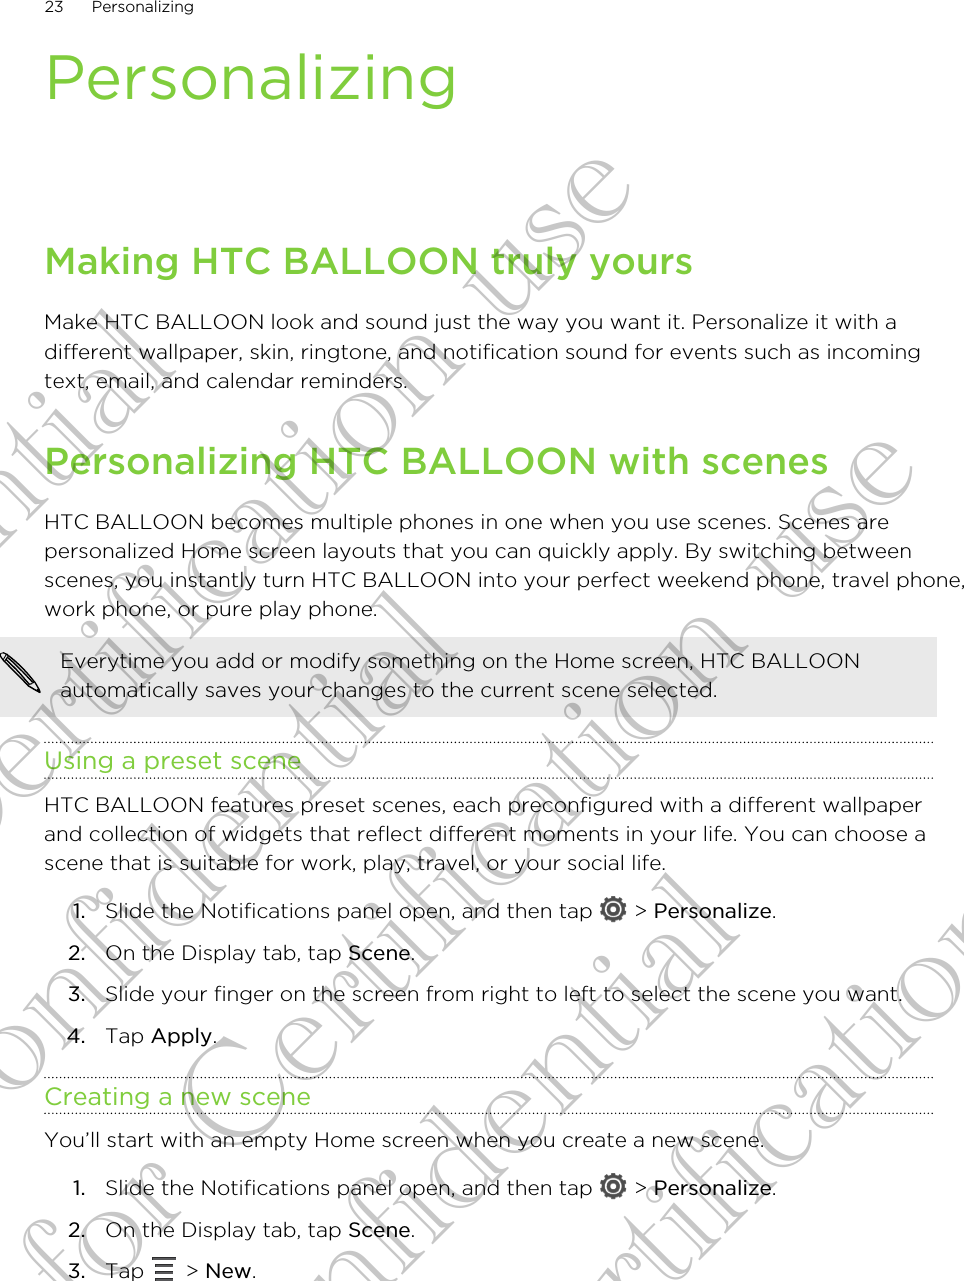 PersonalizingMaking HTC BALLOON truly yoursMake HTC BALLOON look and sound just the way you want it. Personalize it with adifferent wallpaper, skin, ringtone, and notification sound for events such as incomingtext, email, and calendar reminders.Personalizing HTC BALLOON with scenesHTC BALLOON becomes multiple phones in one when you use scenes. Scenes arepersonalized Home screen layouts that you can quickly apply. By switching betweenscenes, you instantly turn HTC BALLOON into your perfect weekend phone, travel phone,work phone, or pure play phone.Everytime you add or modify something on the Home screen, HTC BALLOONautomatically saves your changes to the current scene selected.Using a preset sceneHTC BALLOON features preset scenes, each preconfigured with a different wallpaperand collection of widgets that reflect different moments in your life. You can choose ascene that is suitable for work, play, travel, or your social life.1. Slide the Notifications panel open, and then tap   &gt; Personalize.2. On the Display tab, tap Scene.3. Slide your finger on the screen from right to left to select the scene you want.4. Tap Apply.Creating a new sceneYou’ll start with an empty Home screen when you create a new scene.1. Slide the Notifications panel open, and then tap   &gt; Personalize.2. On the Display tab, tap Scene.3. Tap   &gt; New.23 PersonalizingConfidential for Certification use Confidential for Certification use Confidential for Certification use 